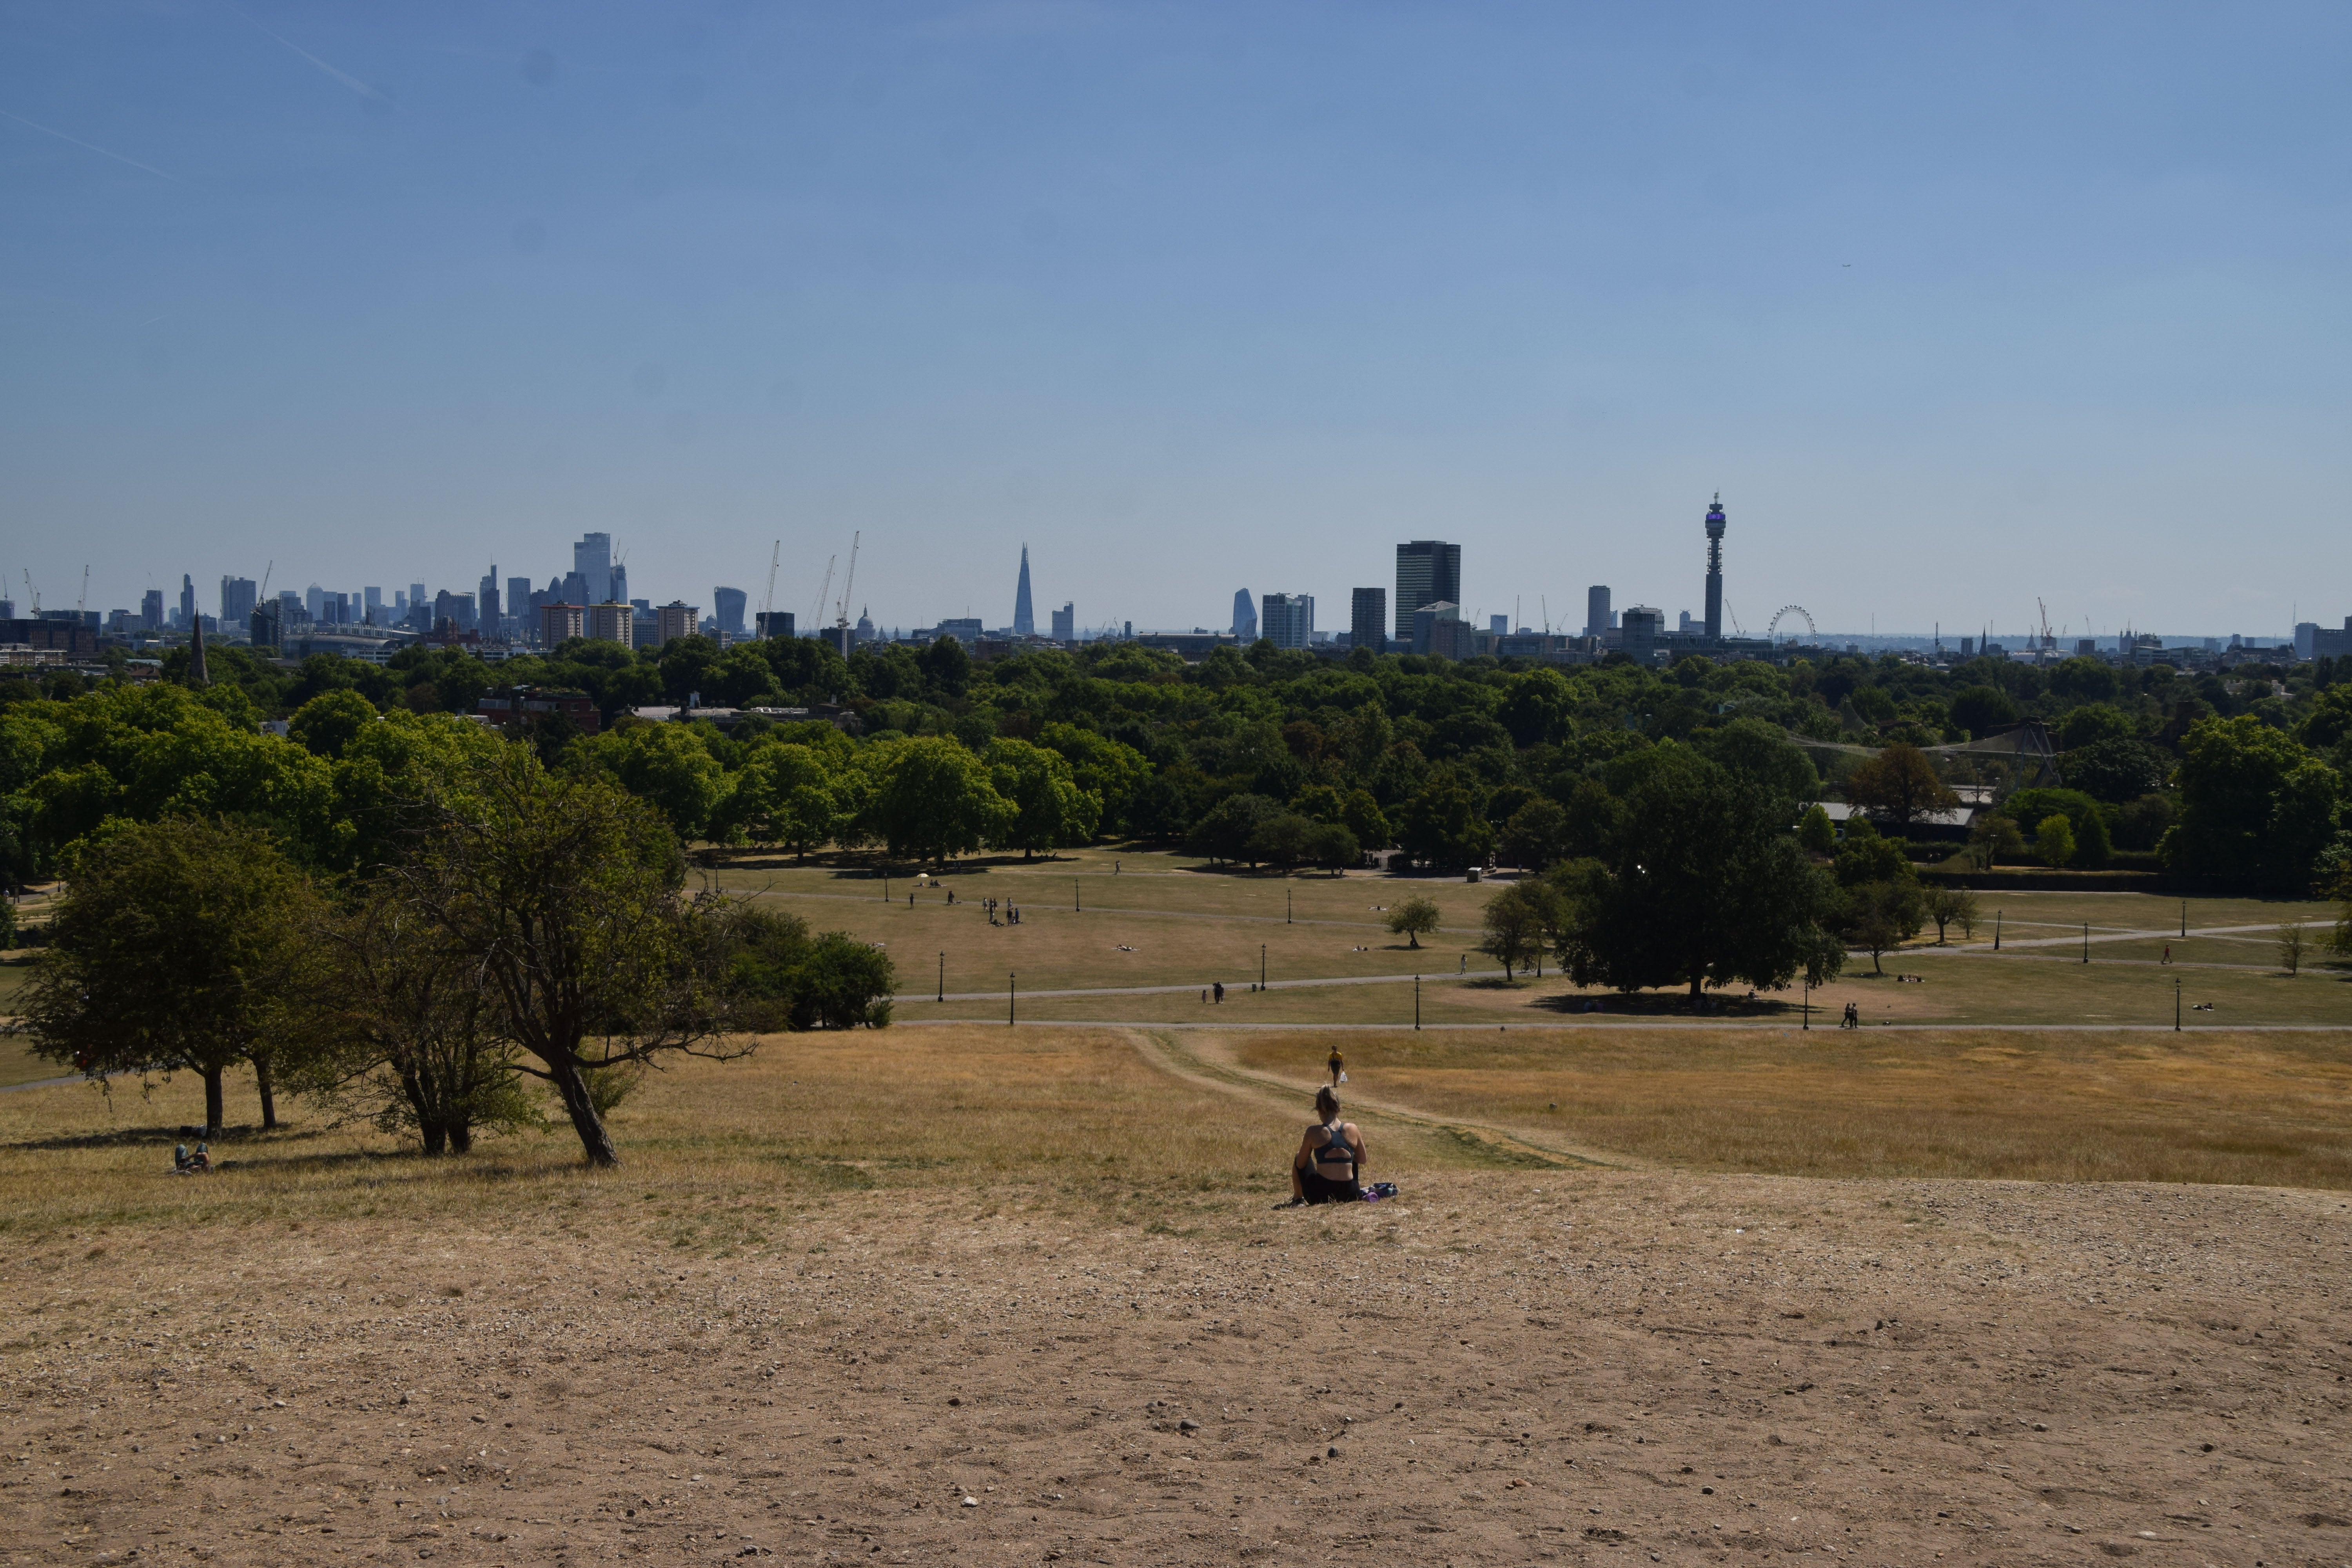 Primrose Hill in London during a heatwave in August 2022